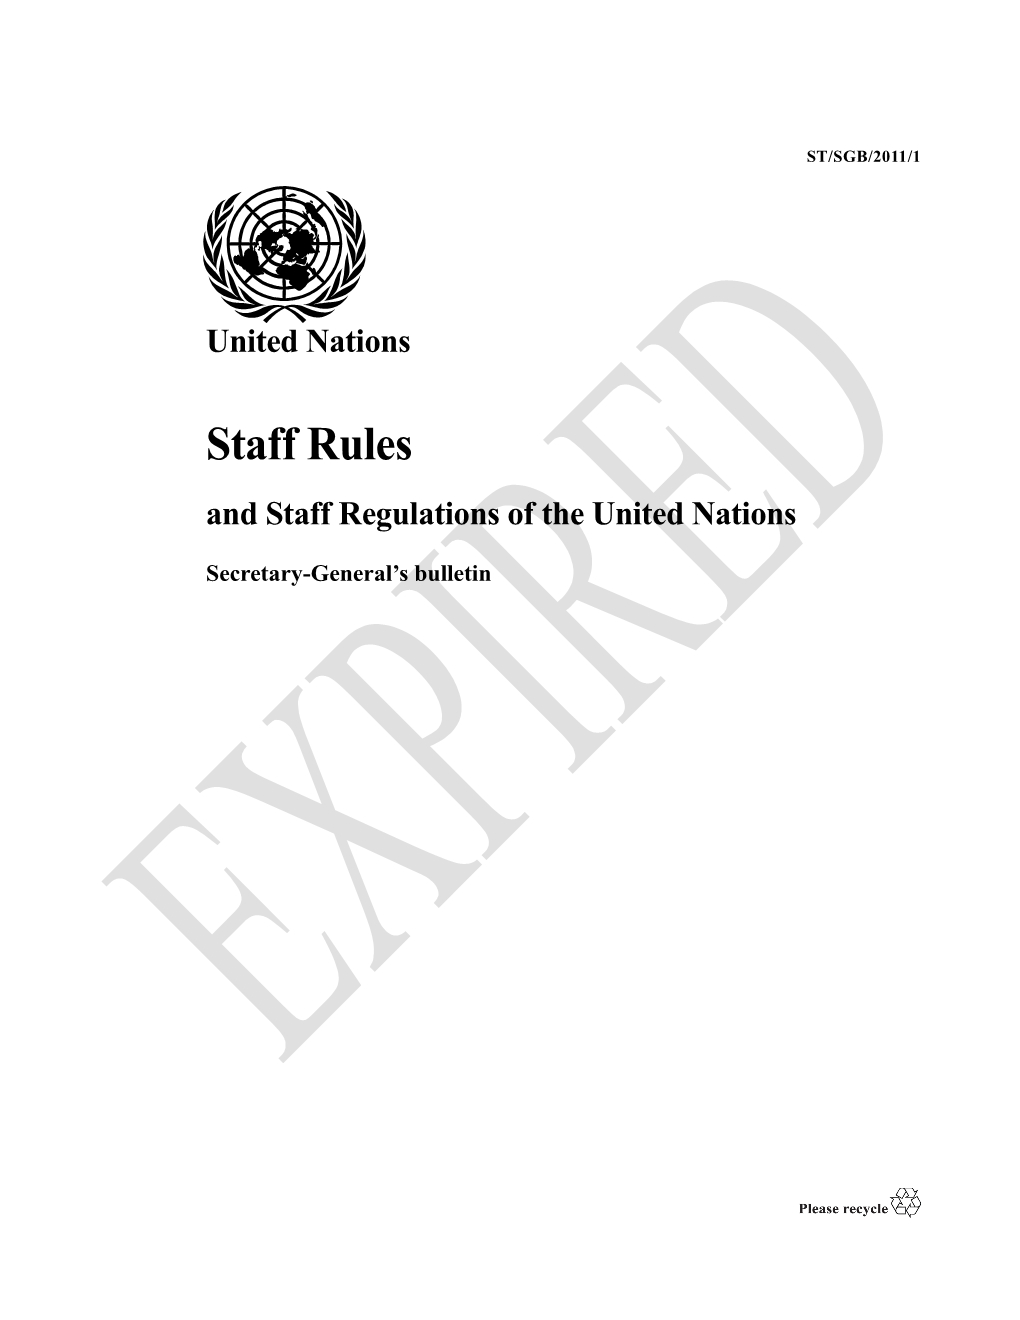 And Staff Regulations of the United Nations